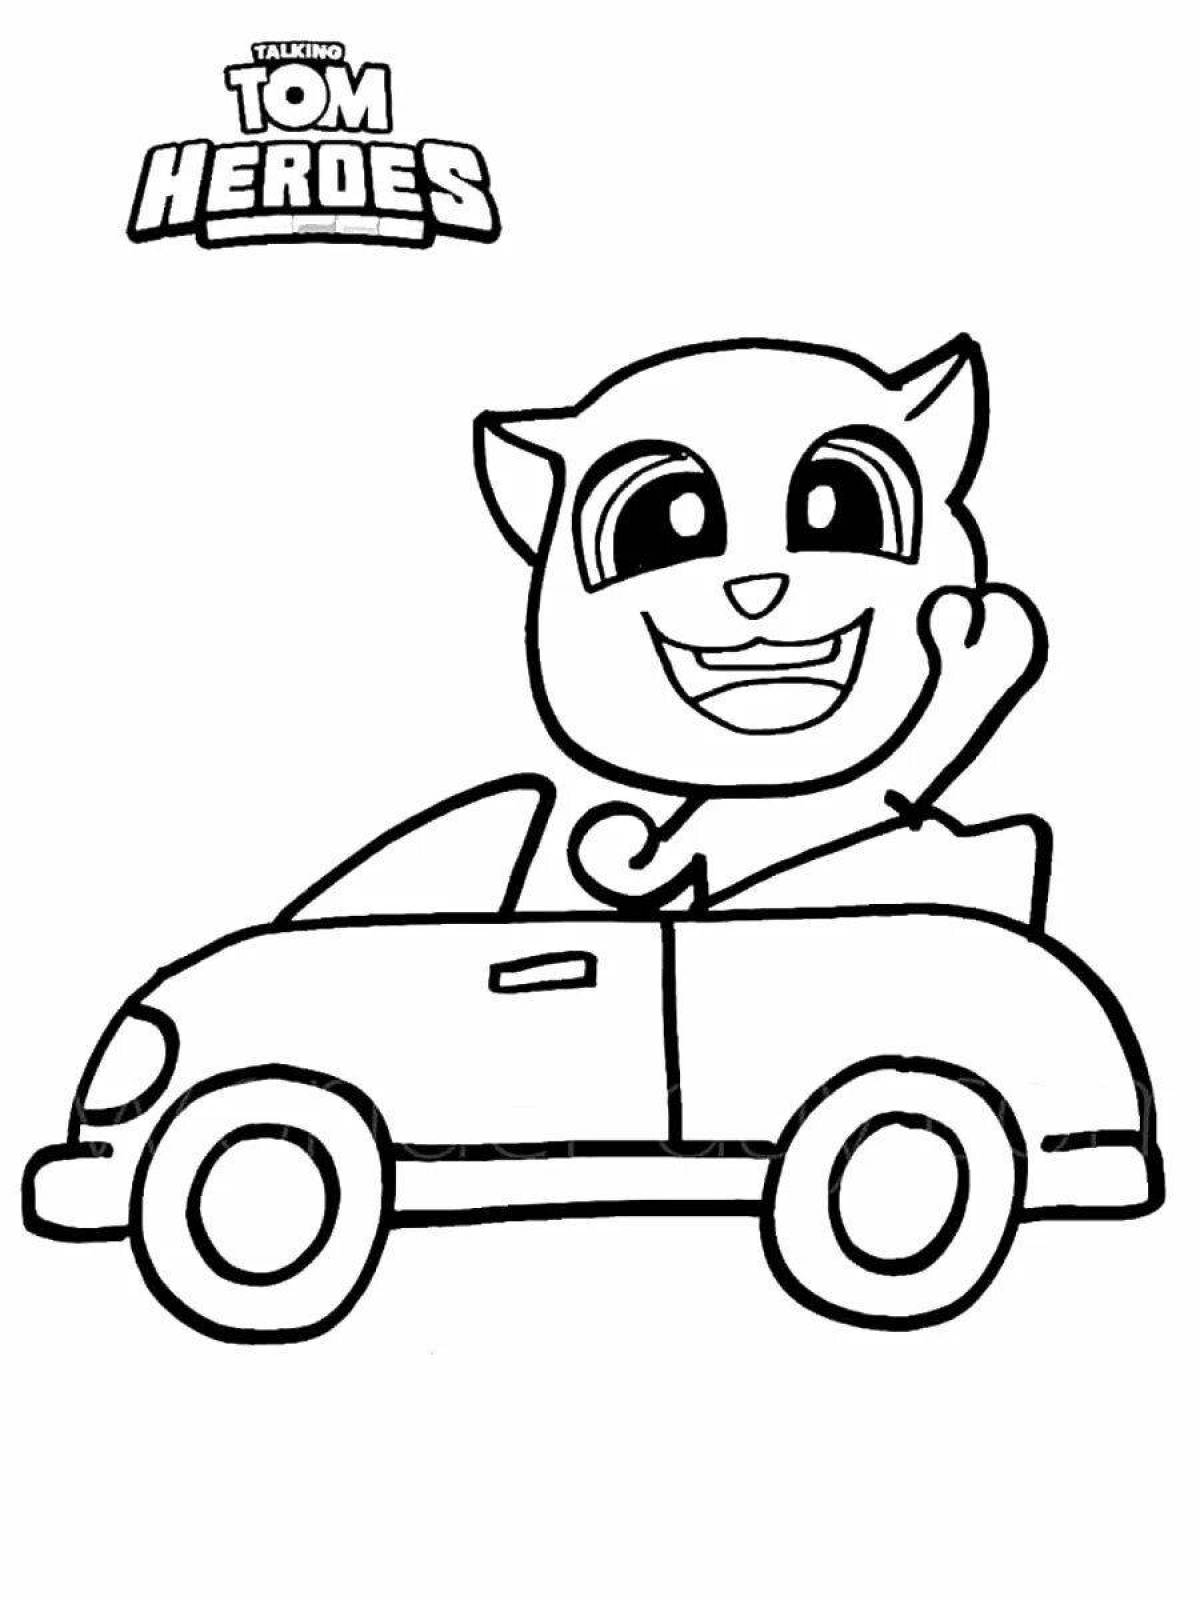 Amazing my talking angela 2 coloring book